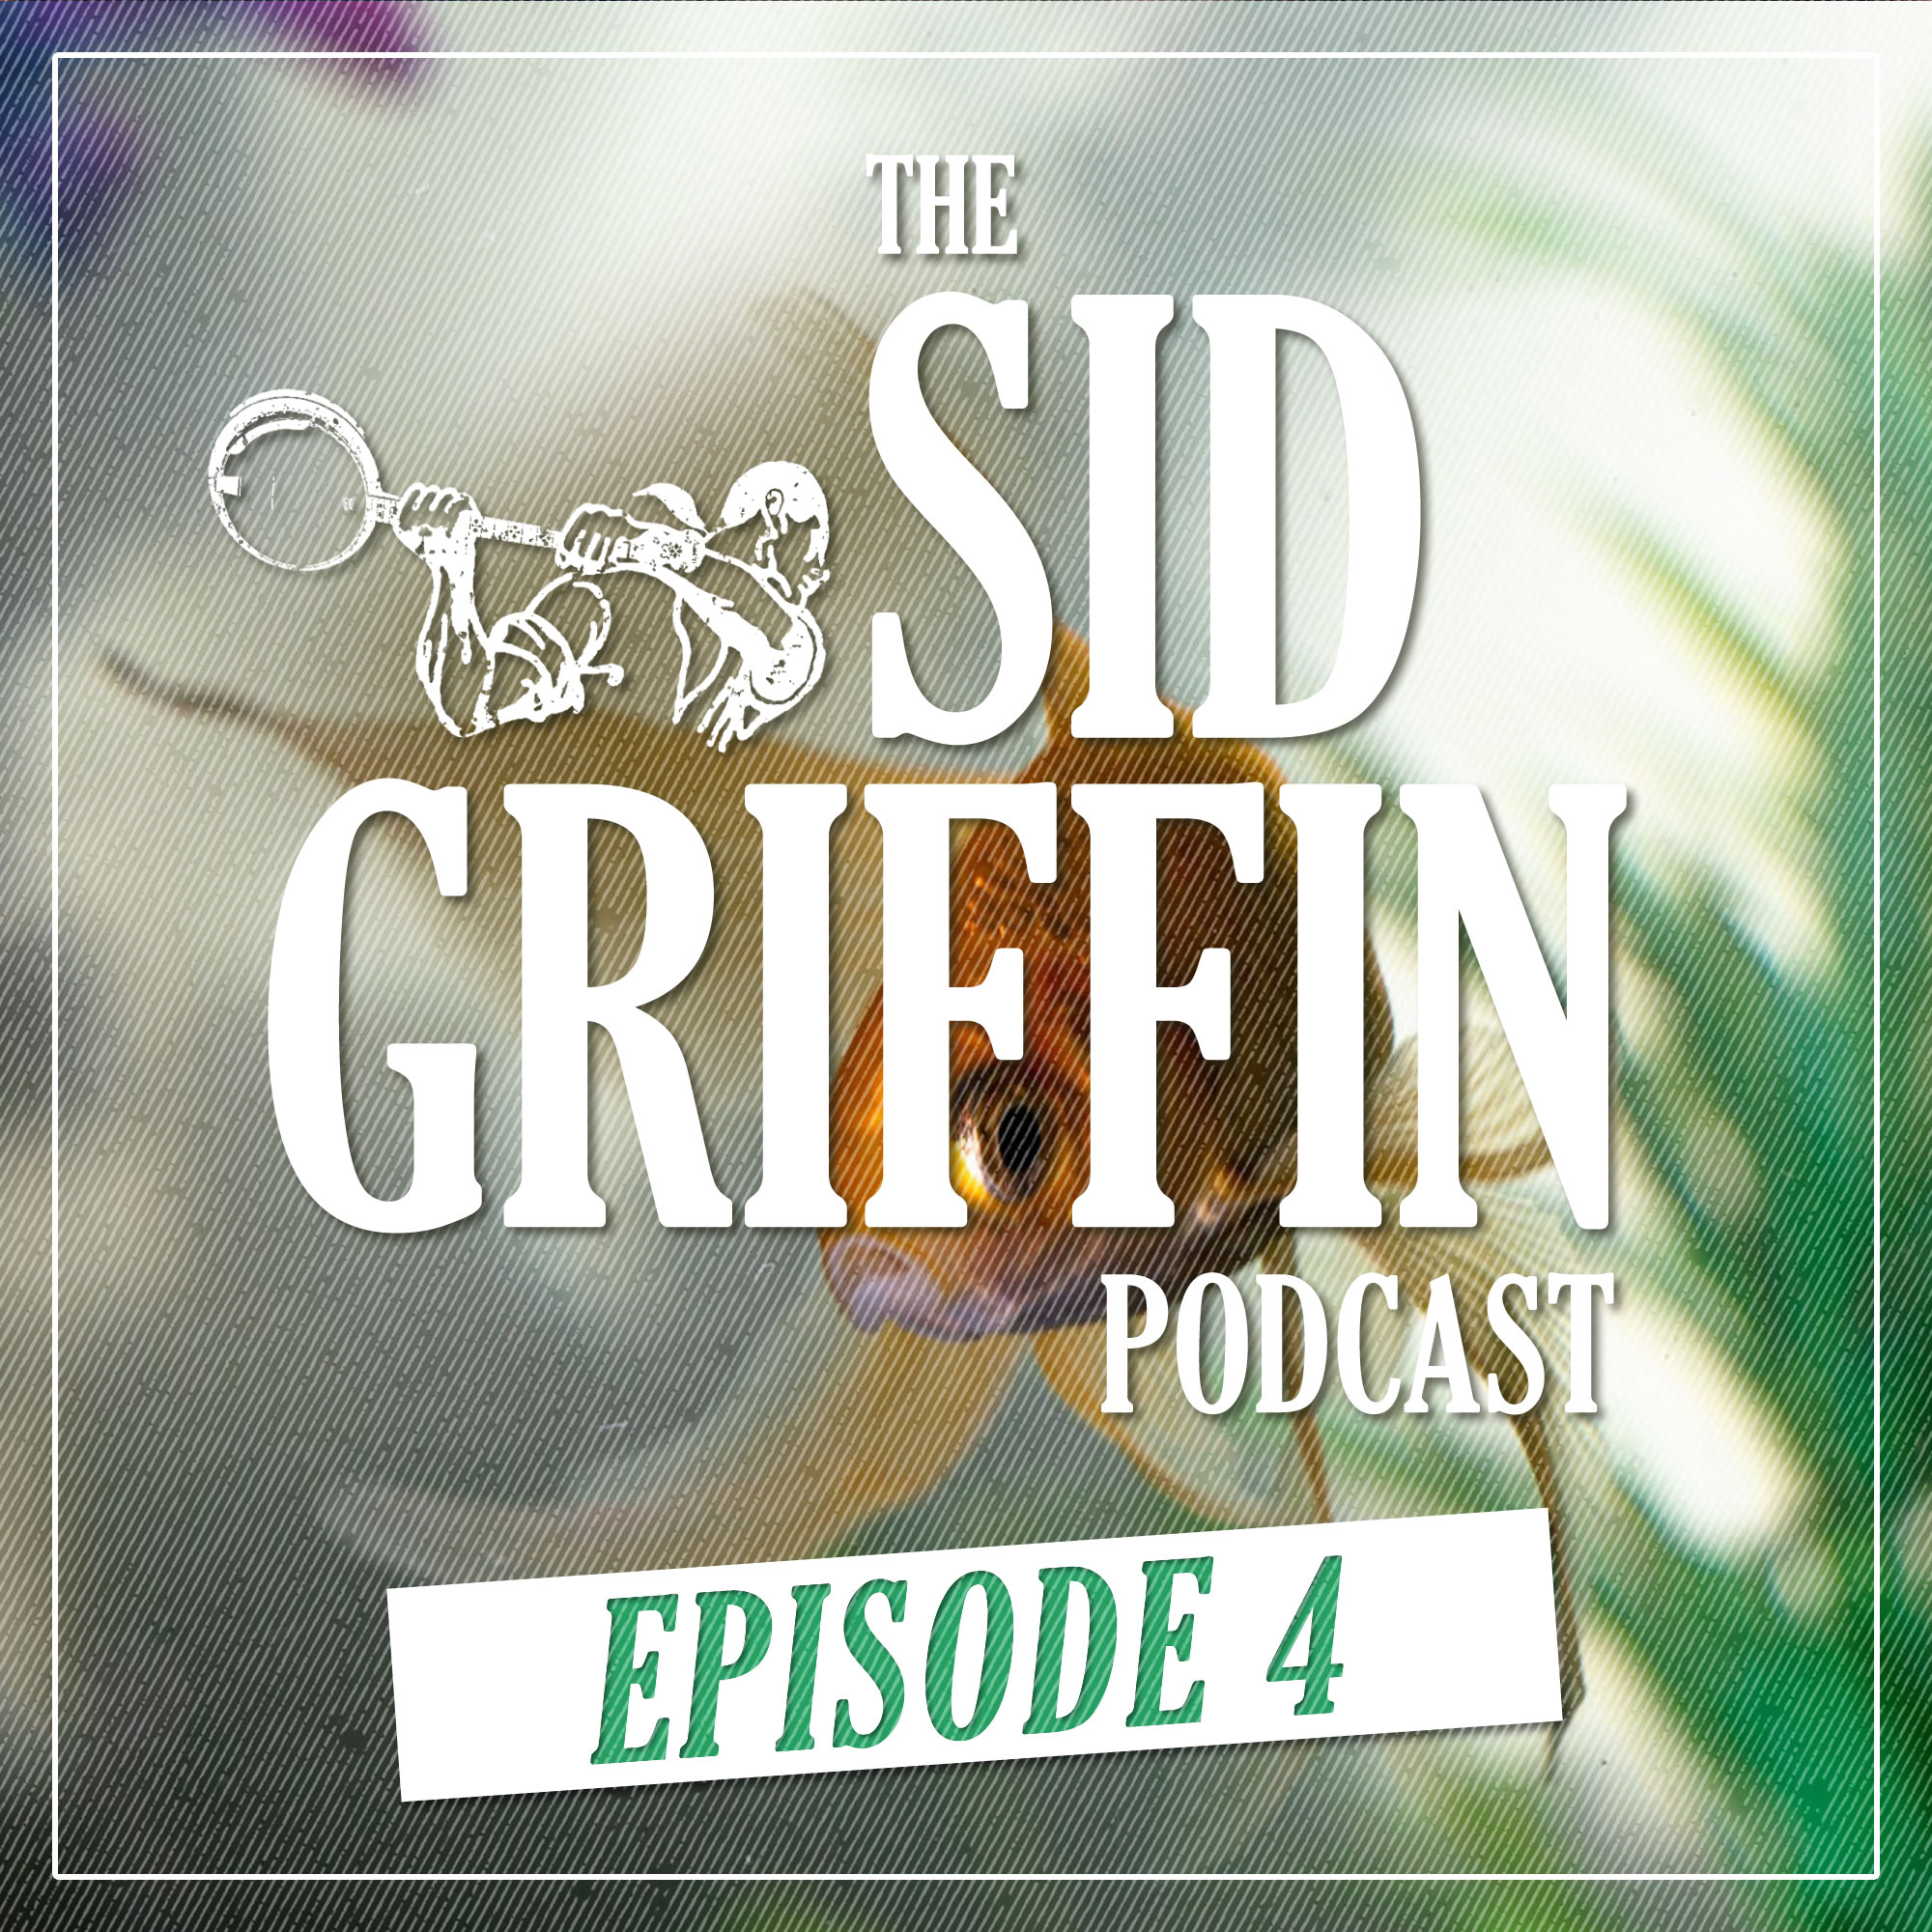 Call All Coal Porters, The Sid Griffin Podcast - No.4